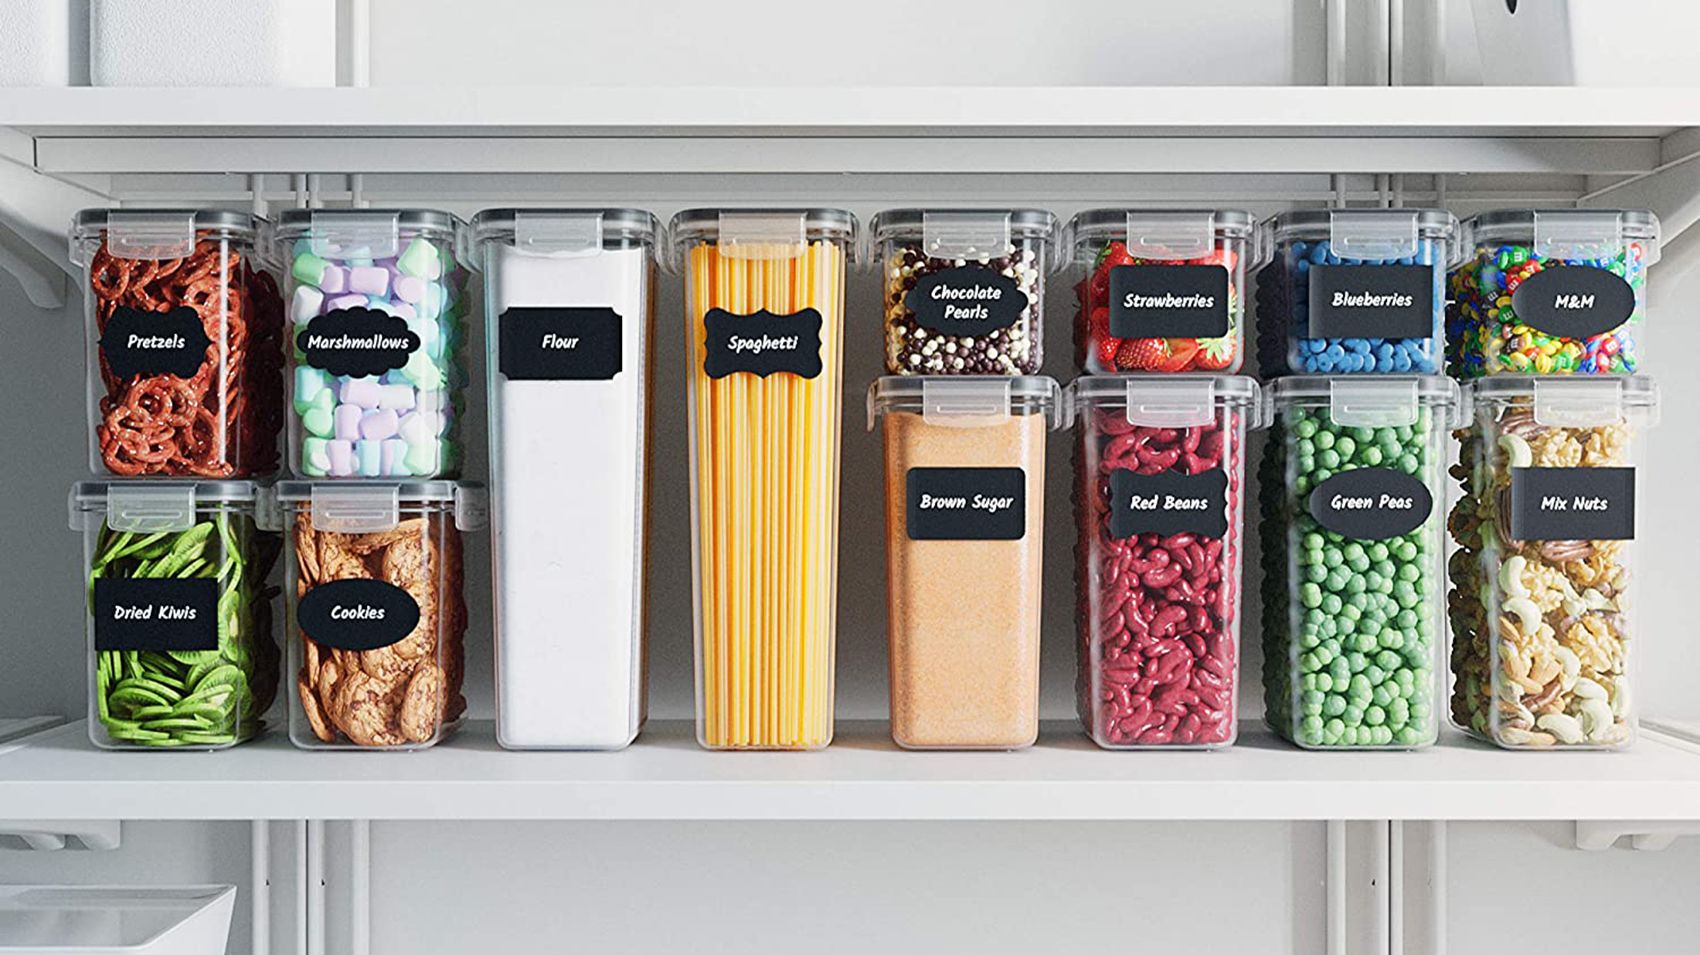 Using Containers to Organize Your Kitchen Simply & Aesthetically